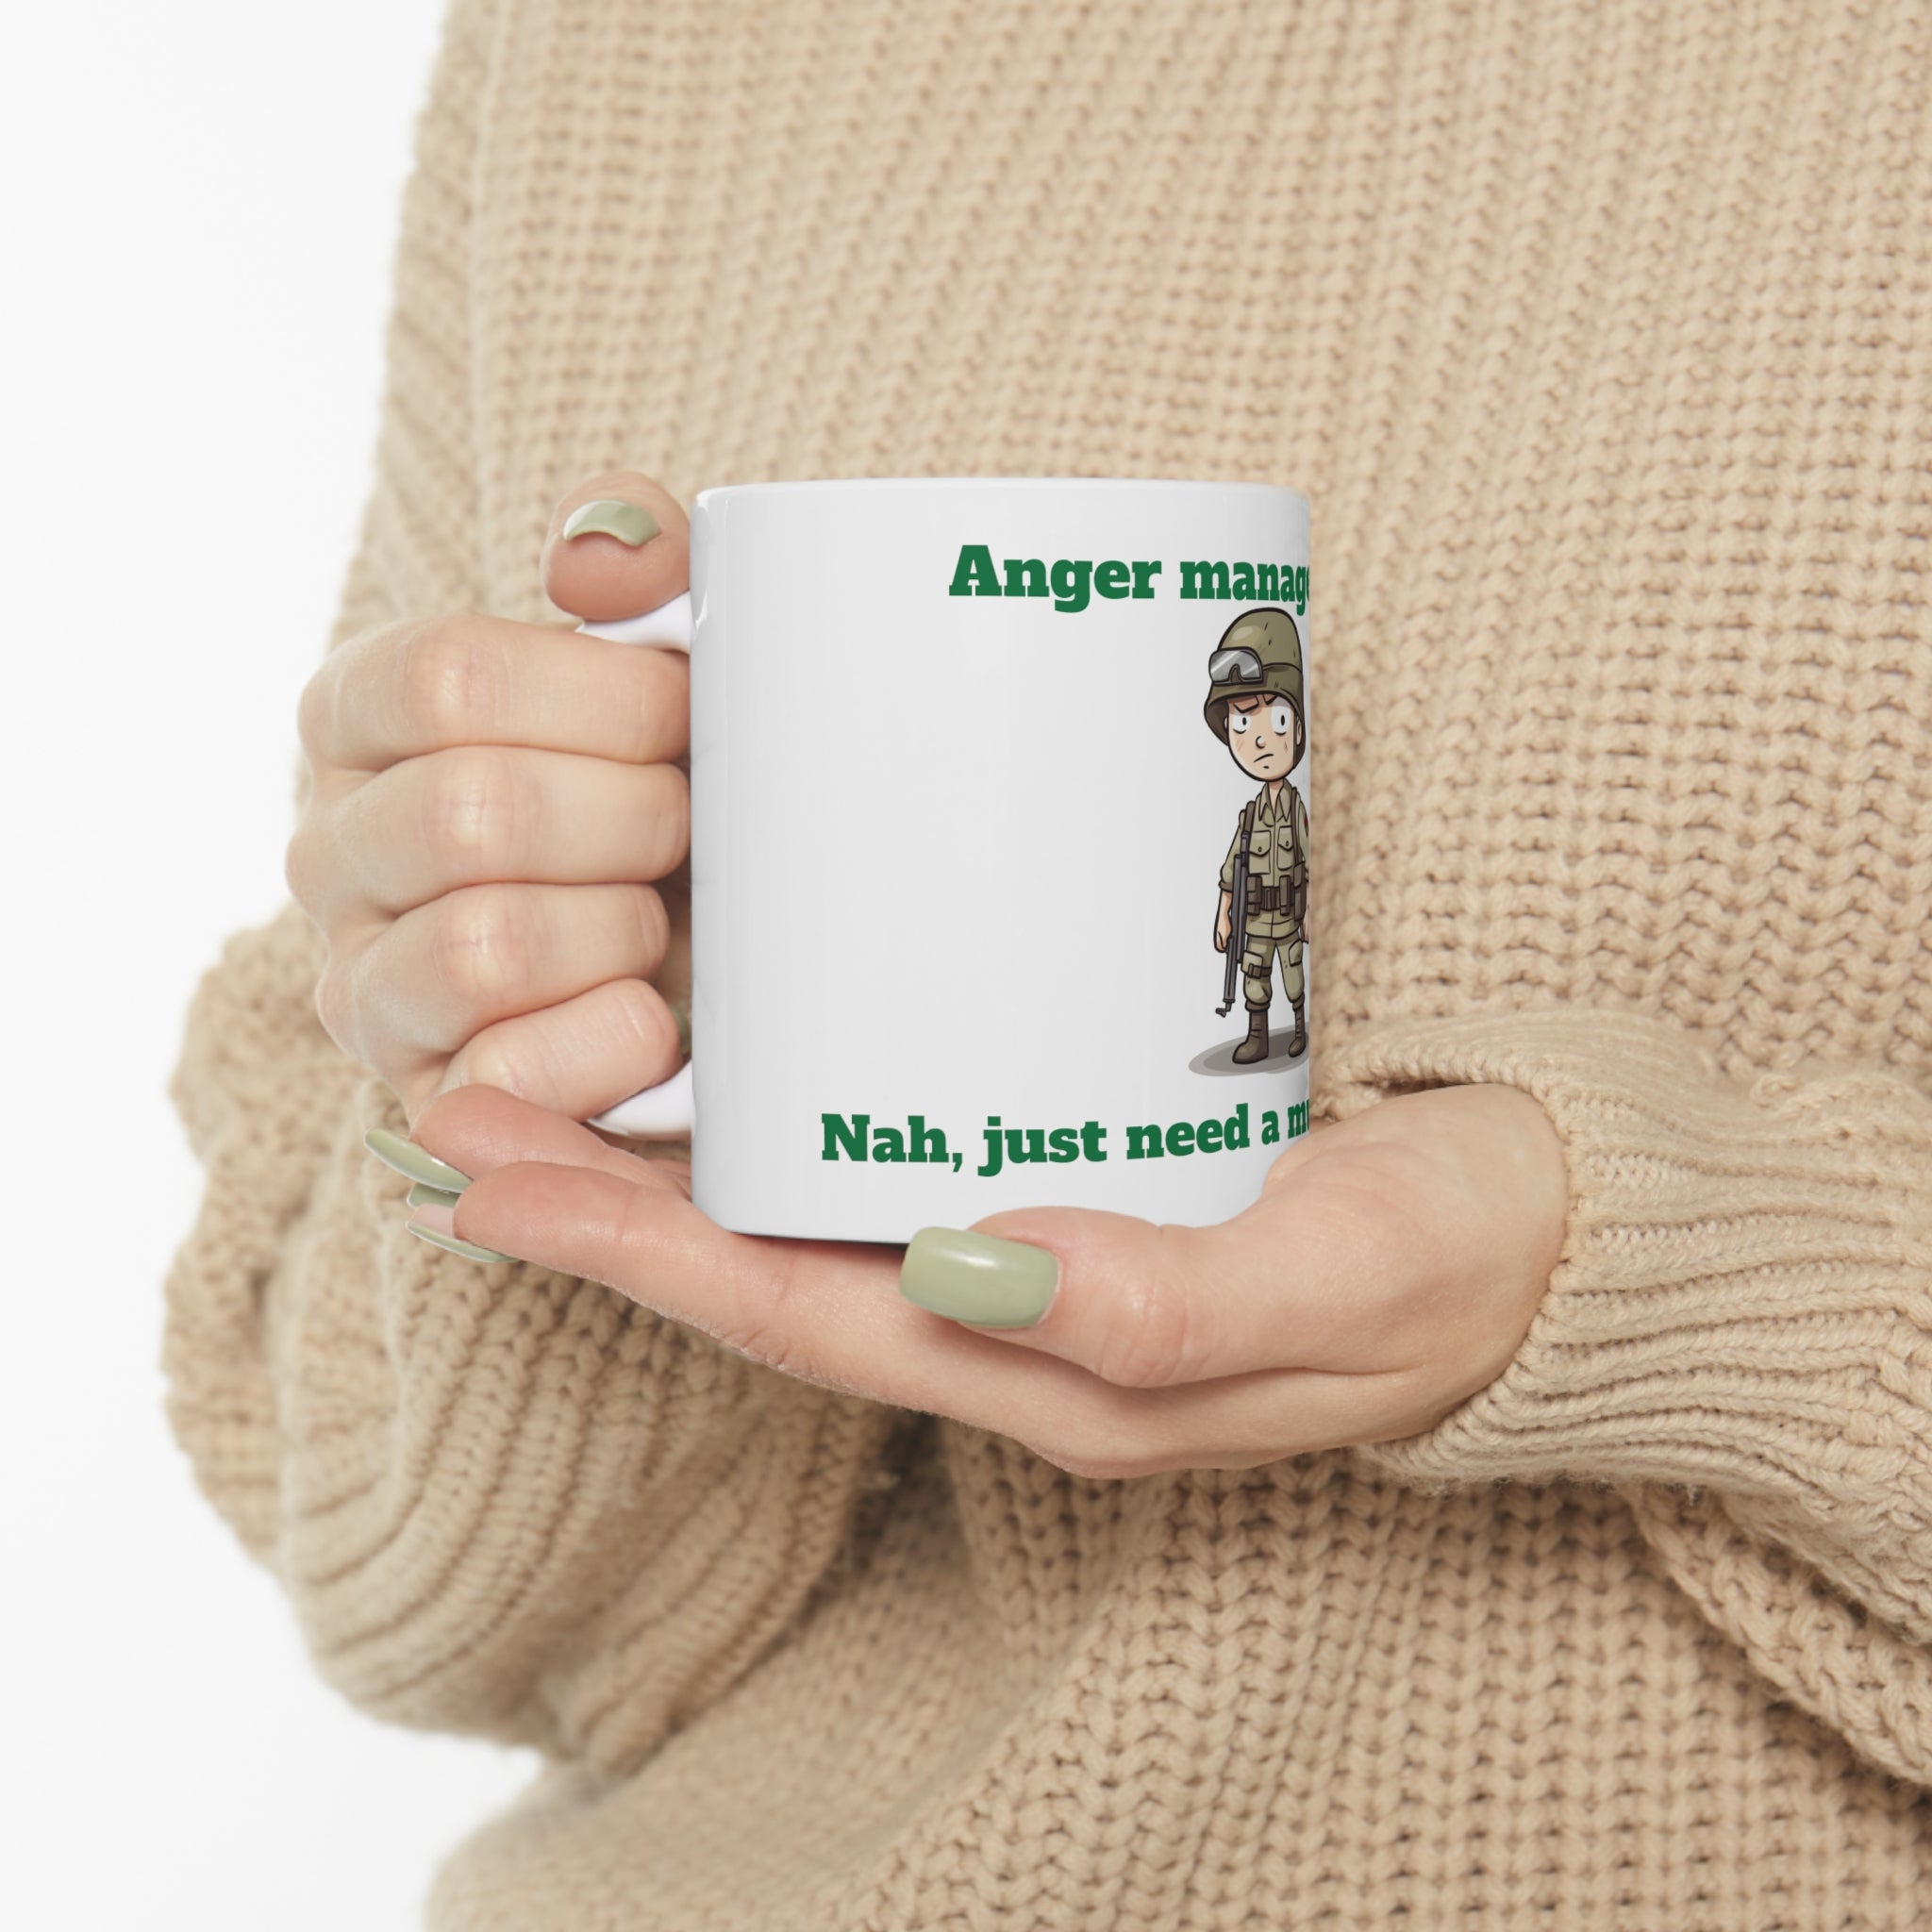 Quirky Soldier Mug - Humorous Ceramic Coffee Cup - Anger Management - Fun Office Gift Battlefield Brew for Office and Gifting